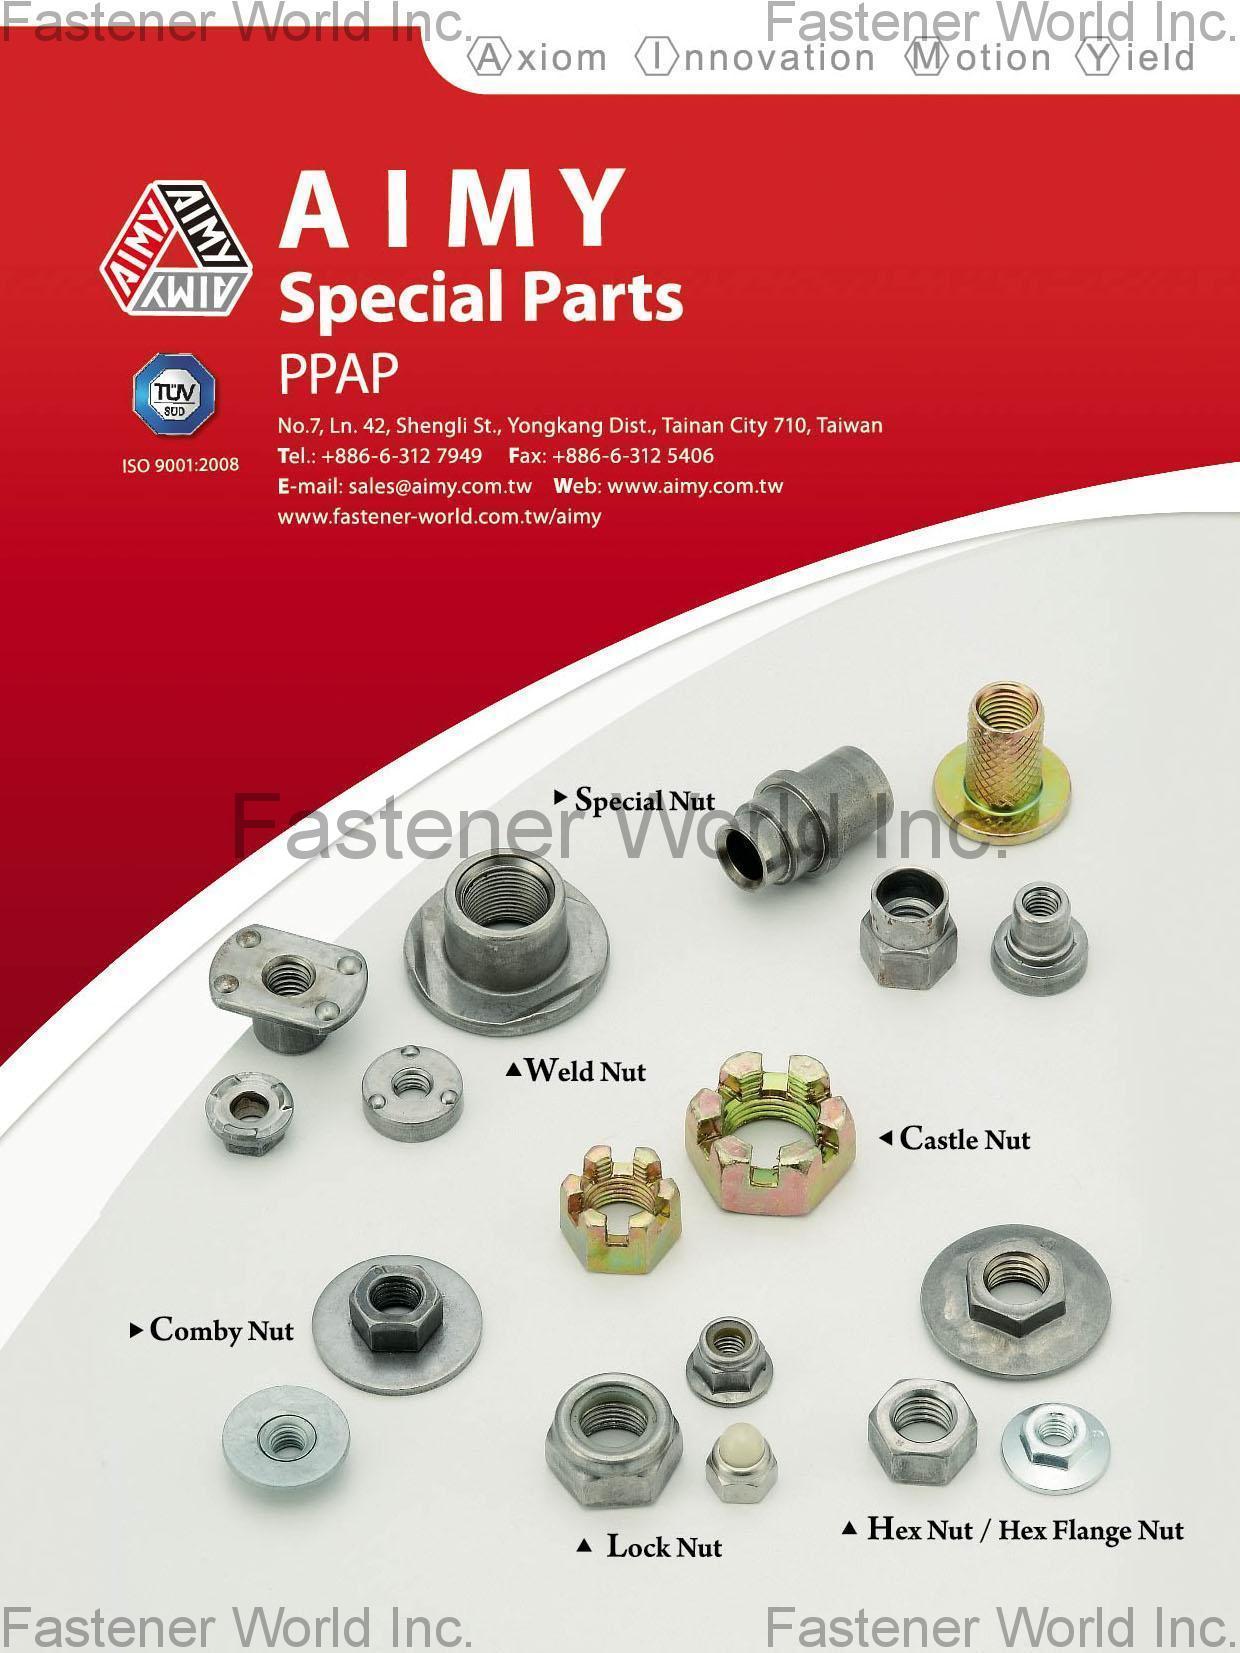 A.I.M.Y Co., Ltd. (AIMY) , Special Nut, Weld Nut, Comby Nut, Castle Nut, Lock Nut, Hex Nut / Hex Flange Nut , FASTENERS <span style='font-size:12px;font-weight:normal' >( Screws, Bolts, Nuts, Washers, Rivets, Pins, Nails, Anchors... )</span>